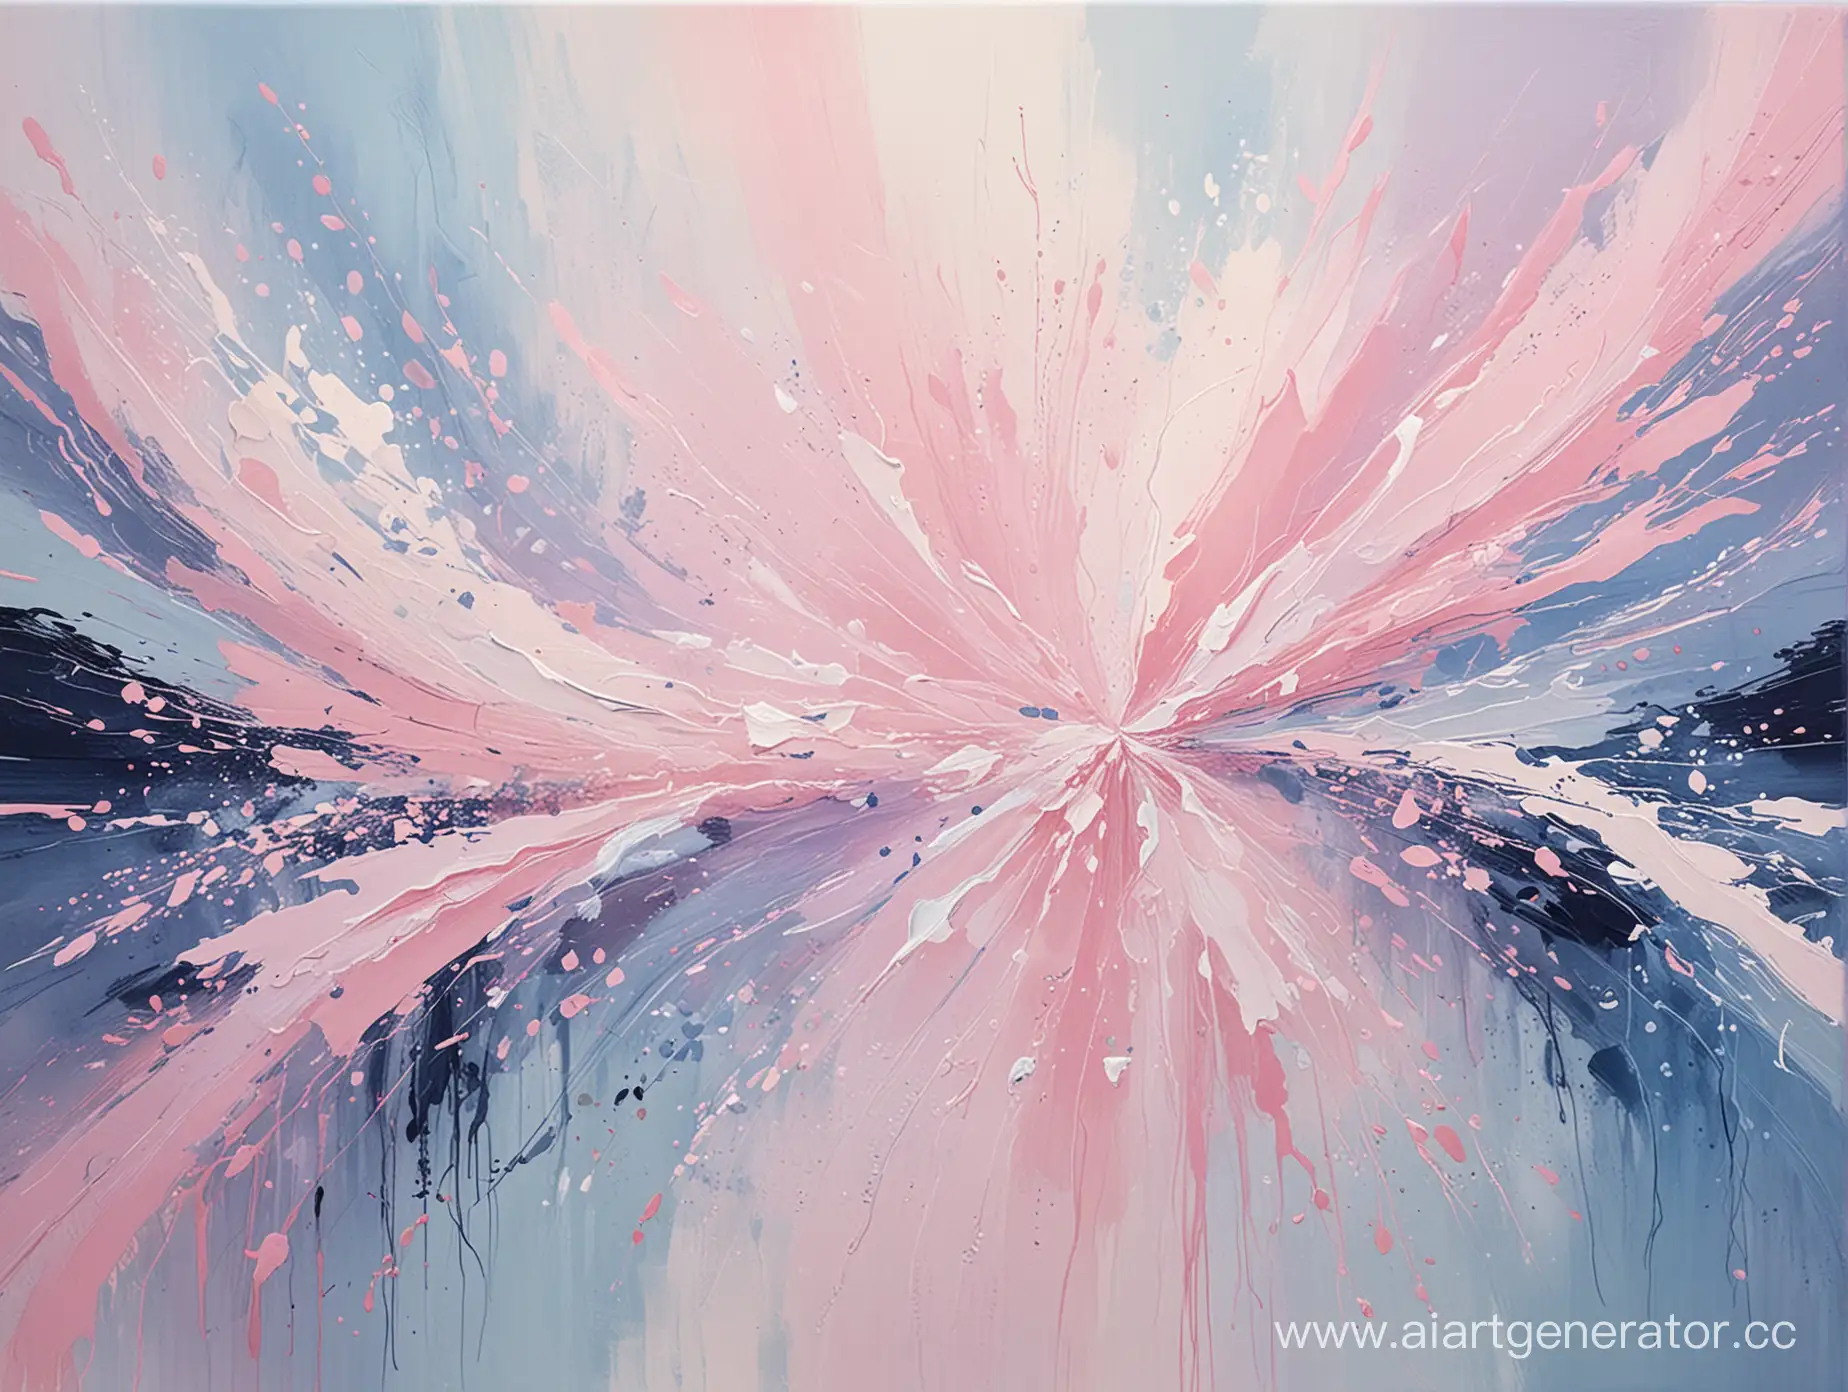 Delicate-Abstract-Oil-Painting-Textured-Strokes-in-Light-Pink-Blue-and-Indigo